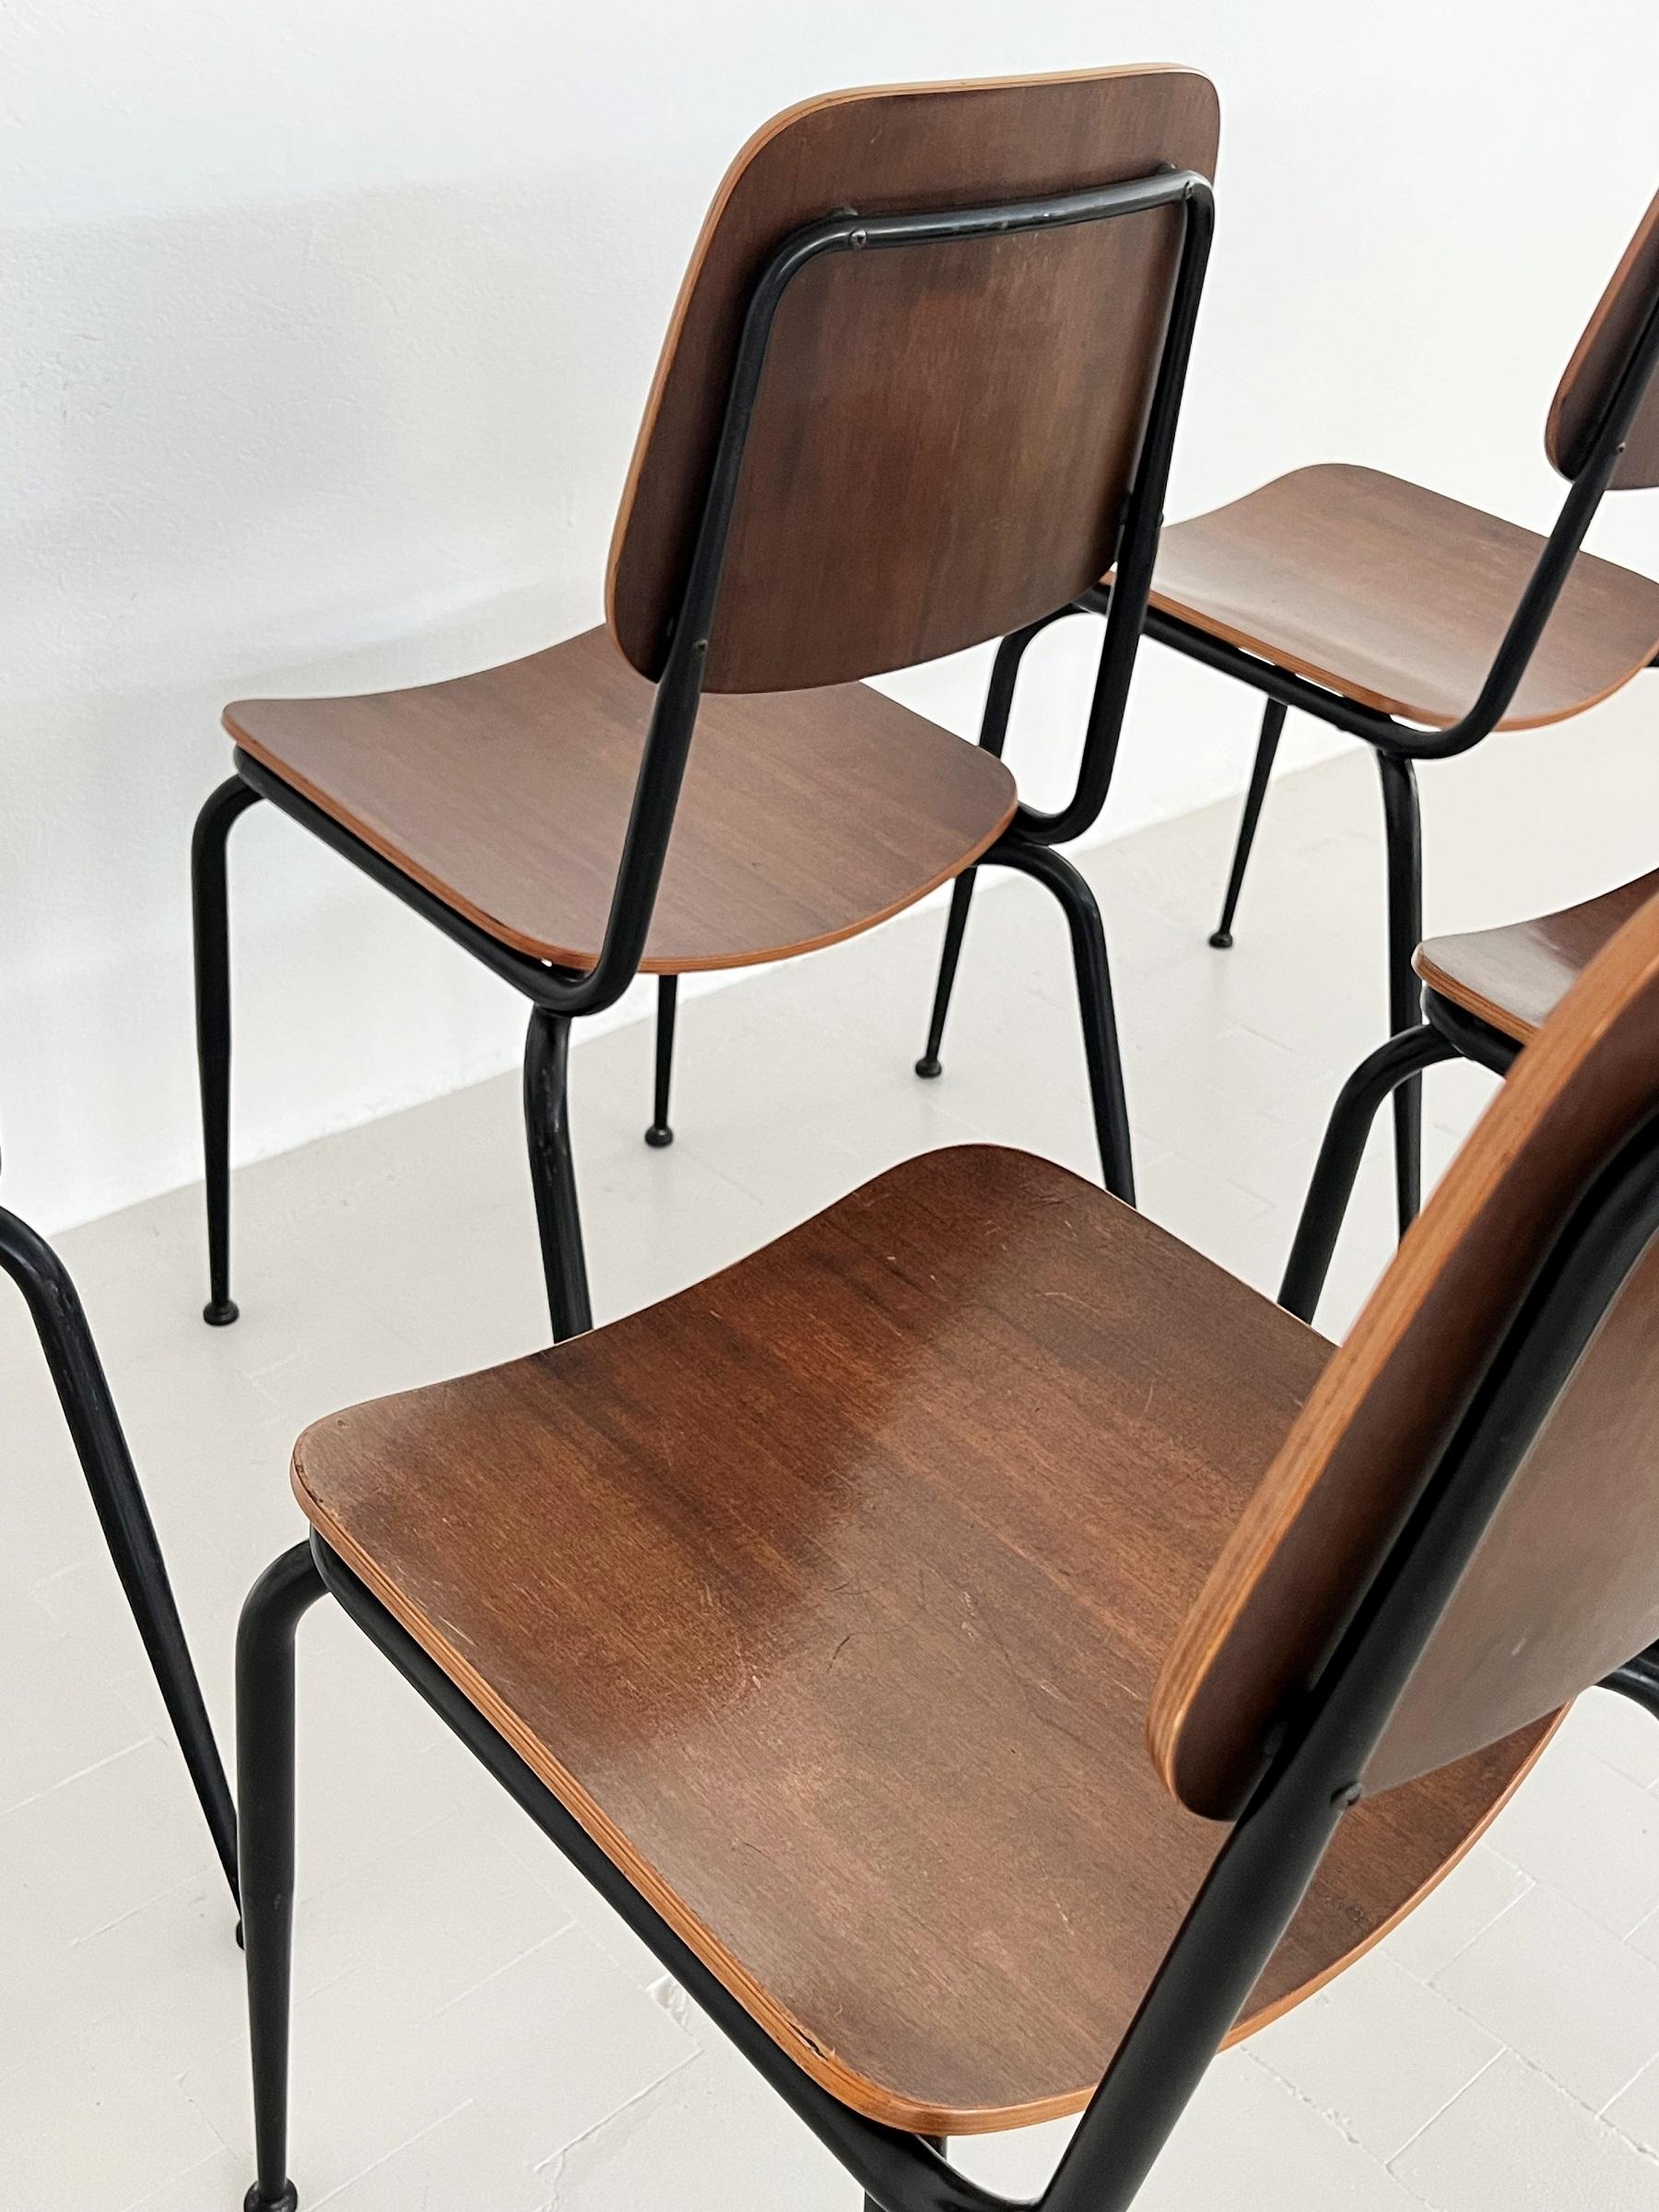 Italian Mid-Century Plywood Nutwood Chairs by Velca Legnano, 1960s For Sale 5